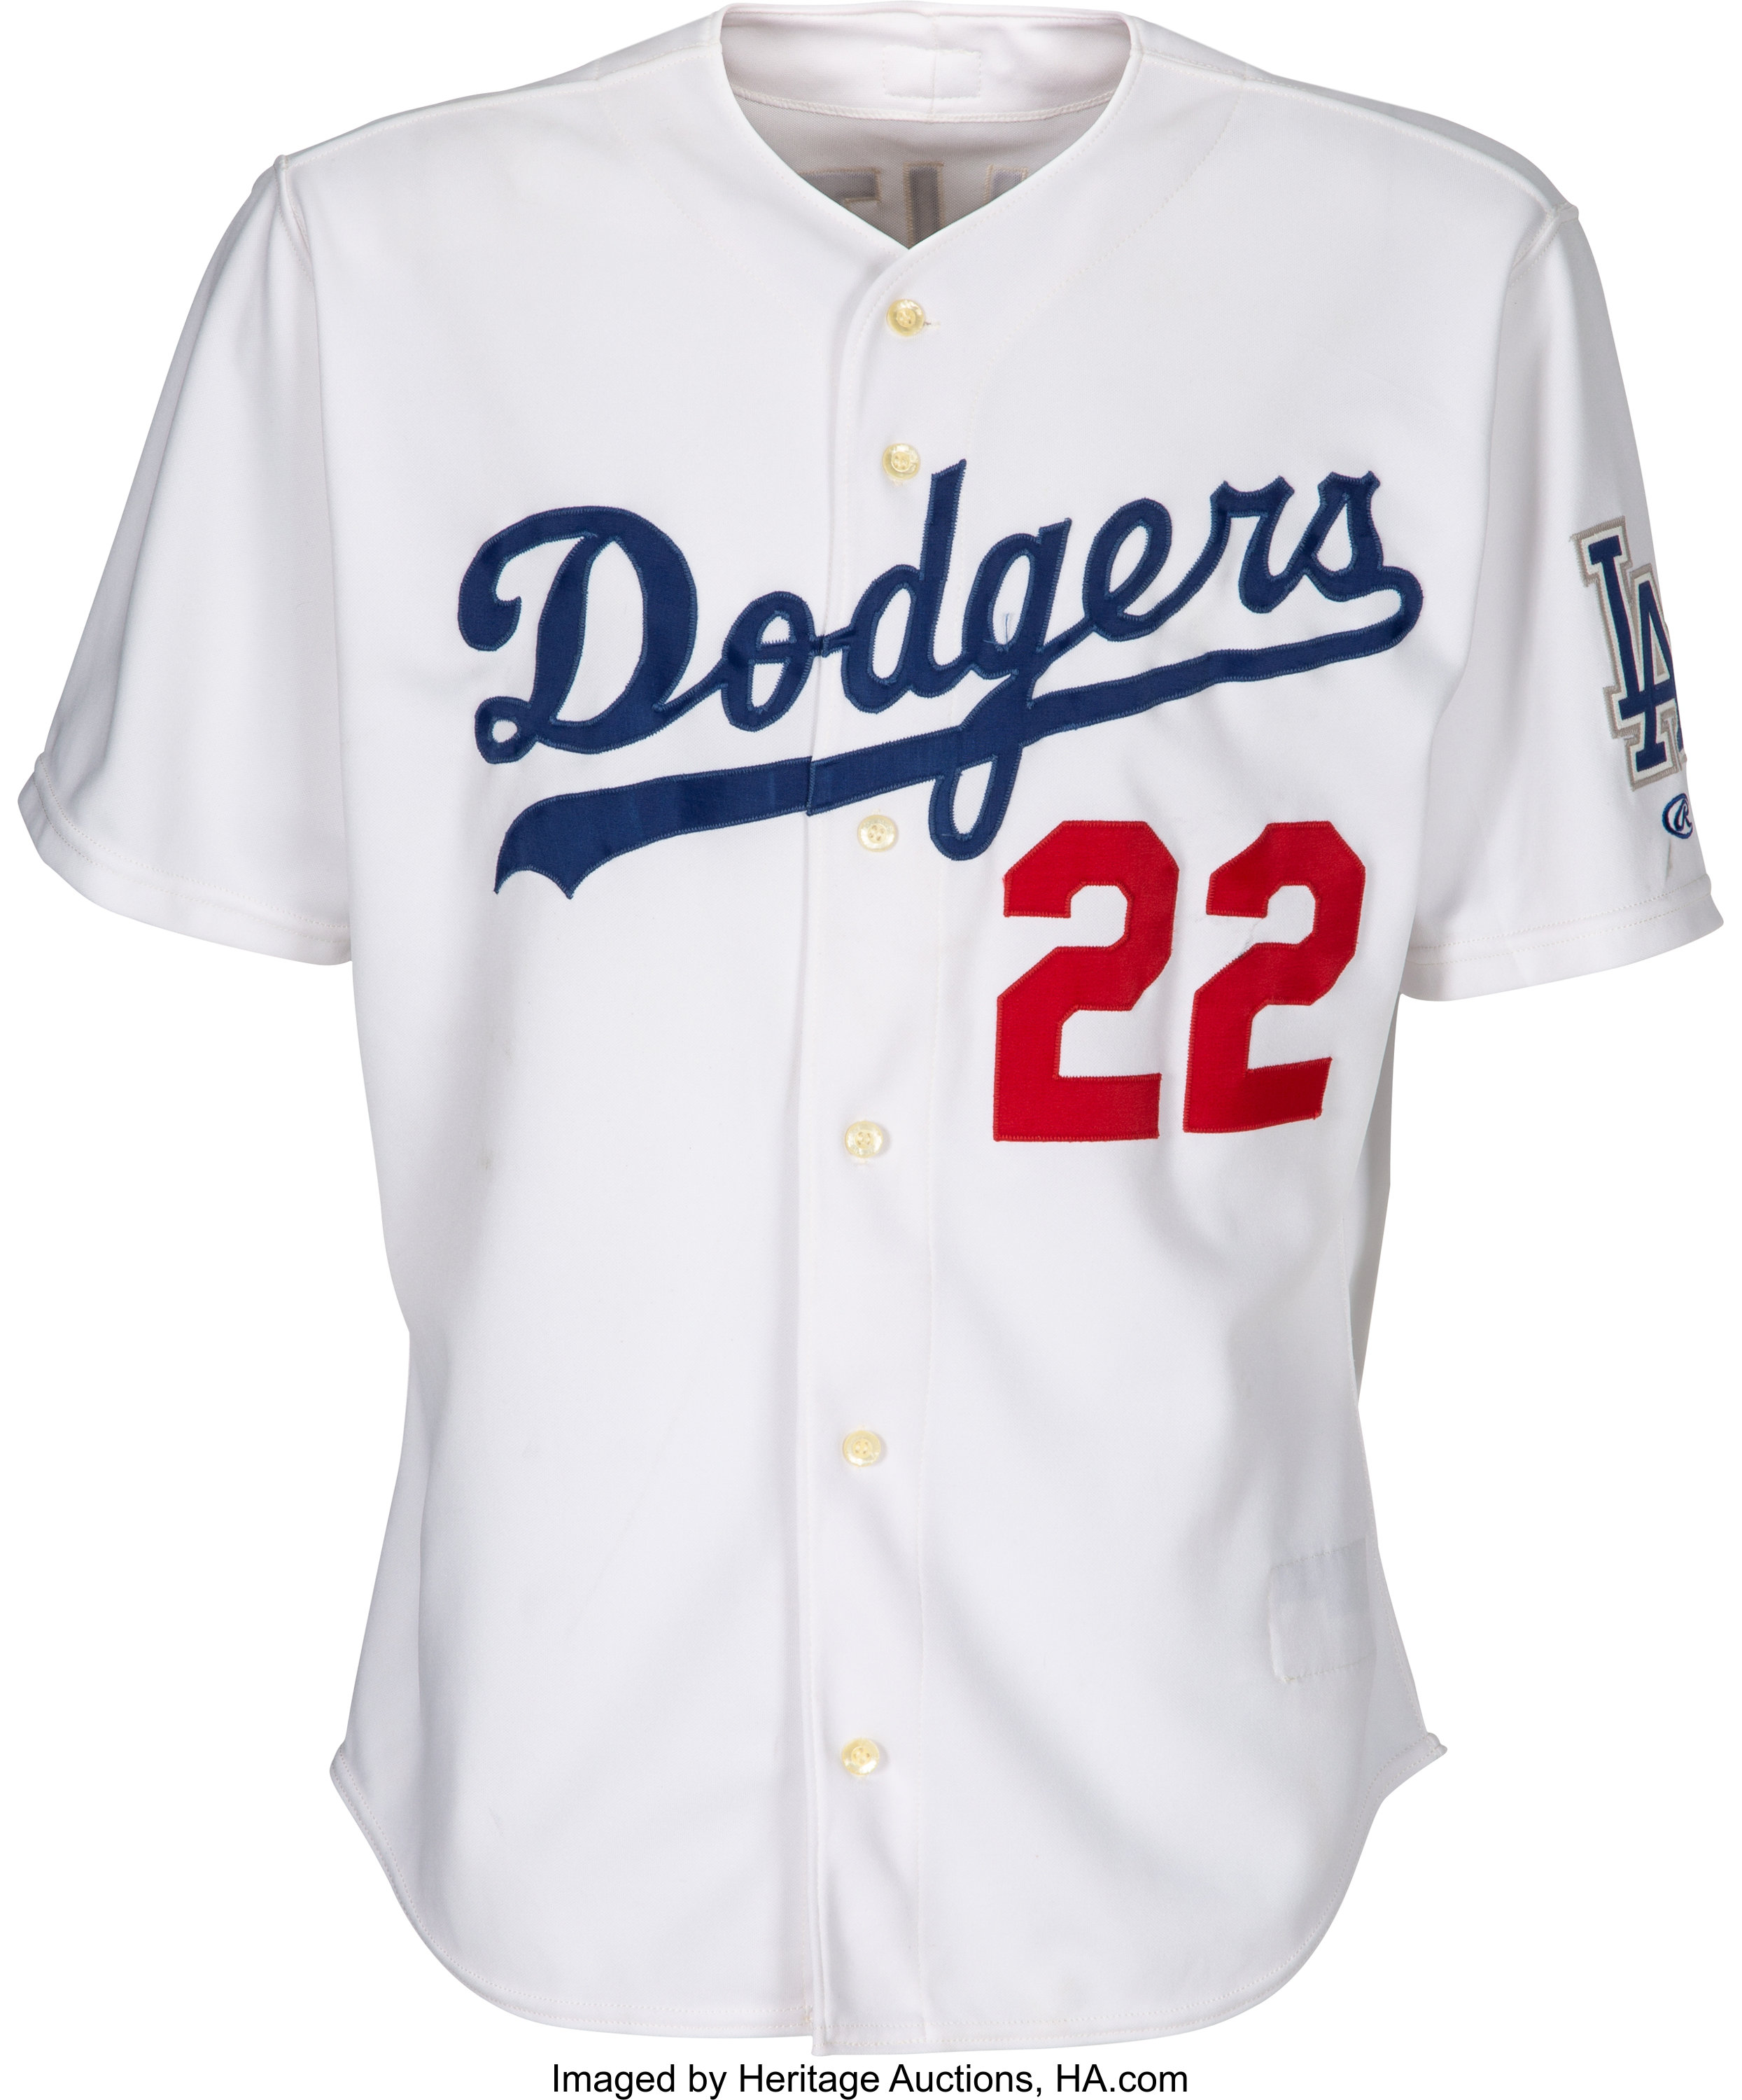 2000 Los Angeles Dodgers Game Worn Jersey from The Devon White, Lot #50160